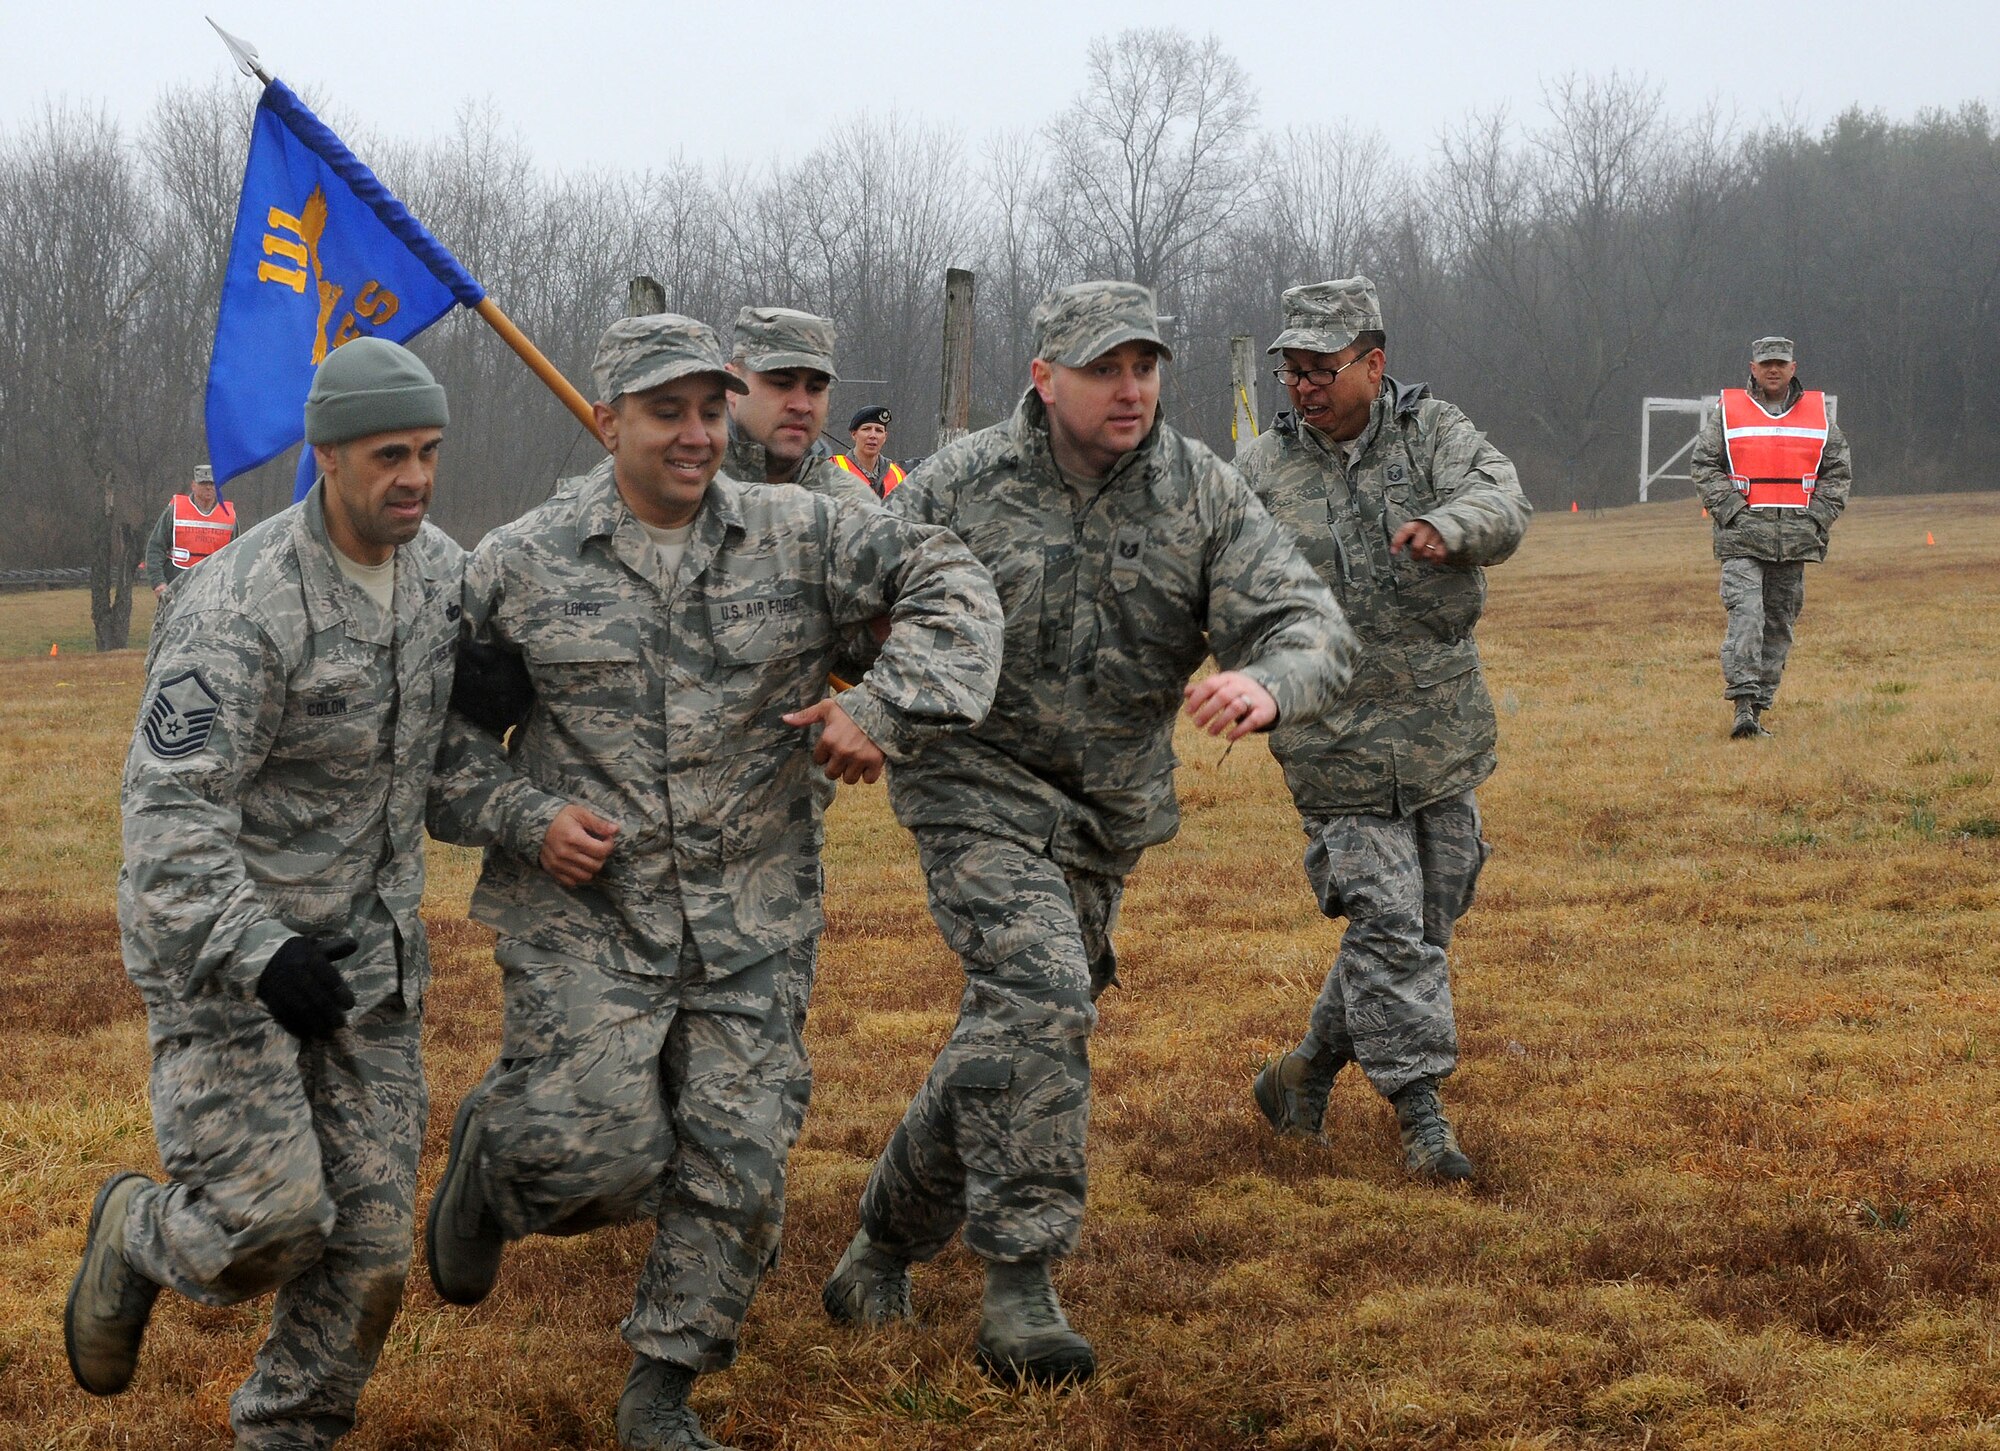 Members of the 111th Security Forces Squadron from Horsham Air Guard Station, Pennsylvania, cross the finish line of the obstacle course during a four-day super drill held April 9 – 12, 2015, at Fort Indiantown Gap and Gettysburg National Military Park. Nearly 60 Guardsmen from the 111th Attack Wing’s security forces squadron participated in the four-day team building and skills-training event. (U.S. Air National Guard photo by Tech. Sgt. Andria Allmond/Released)